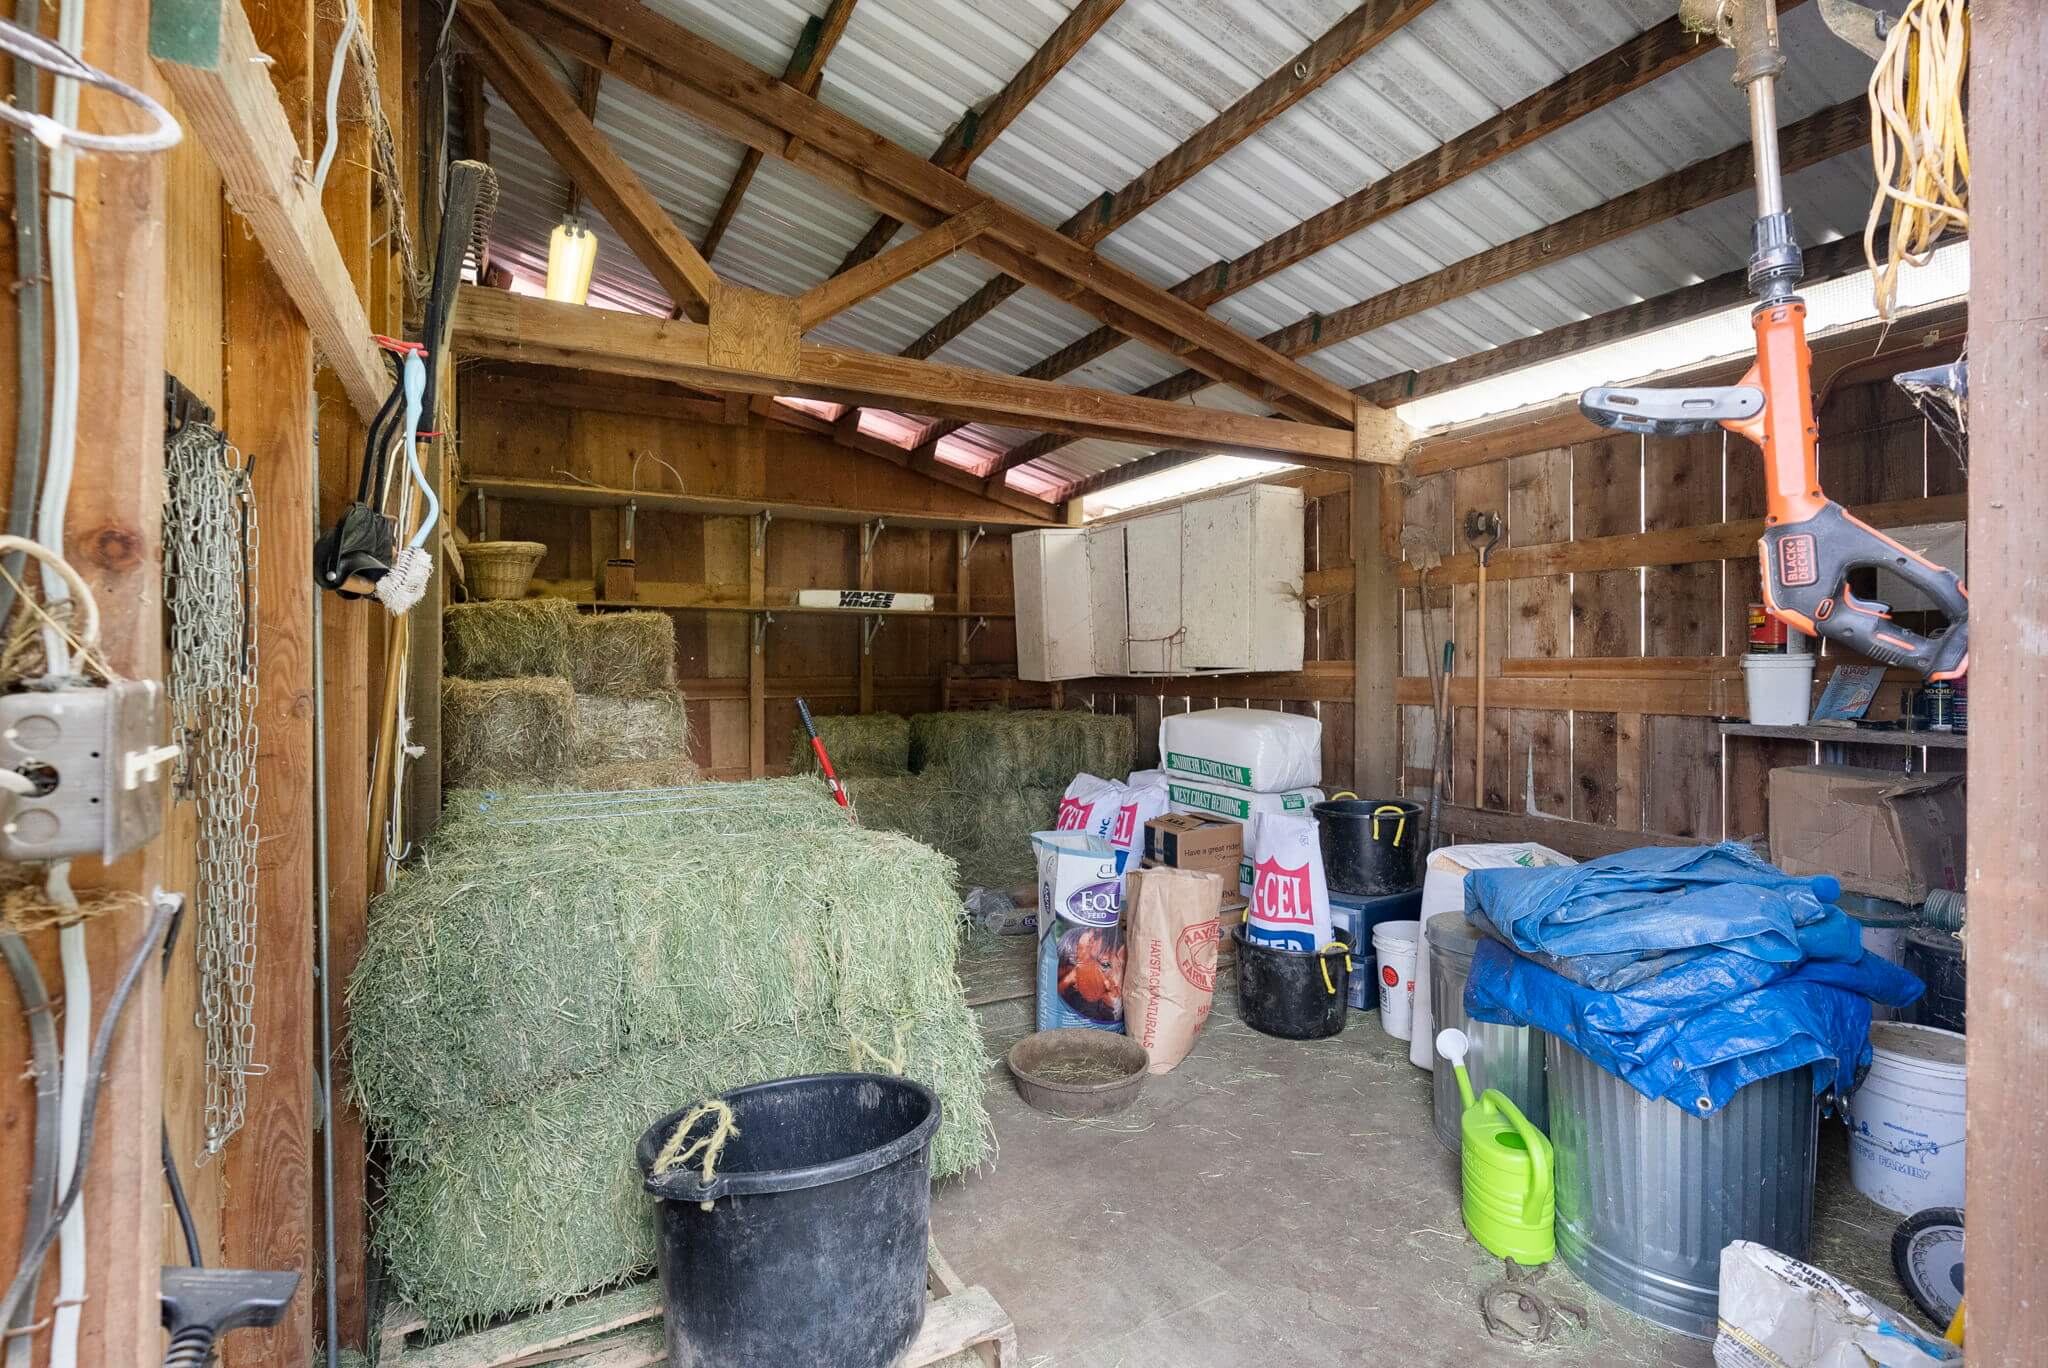 Each smaller barn has its own feed and tack room